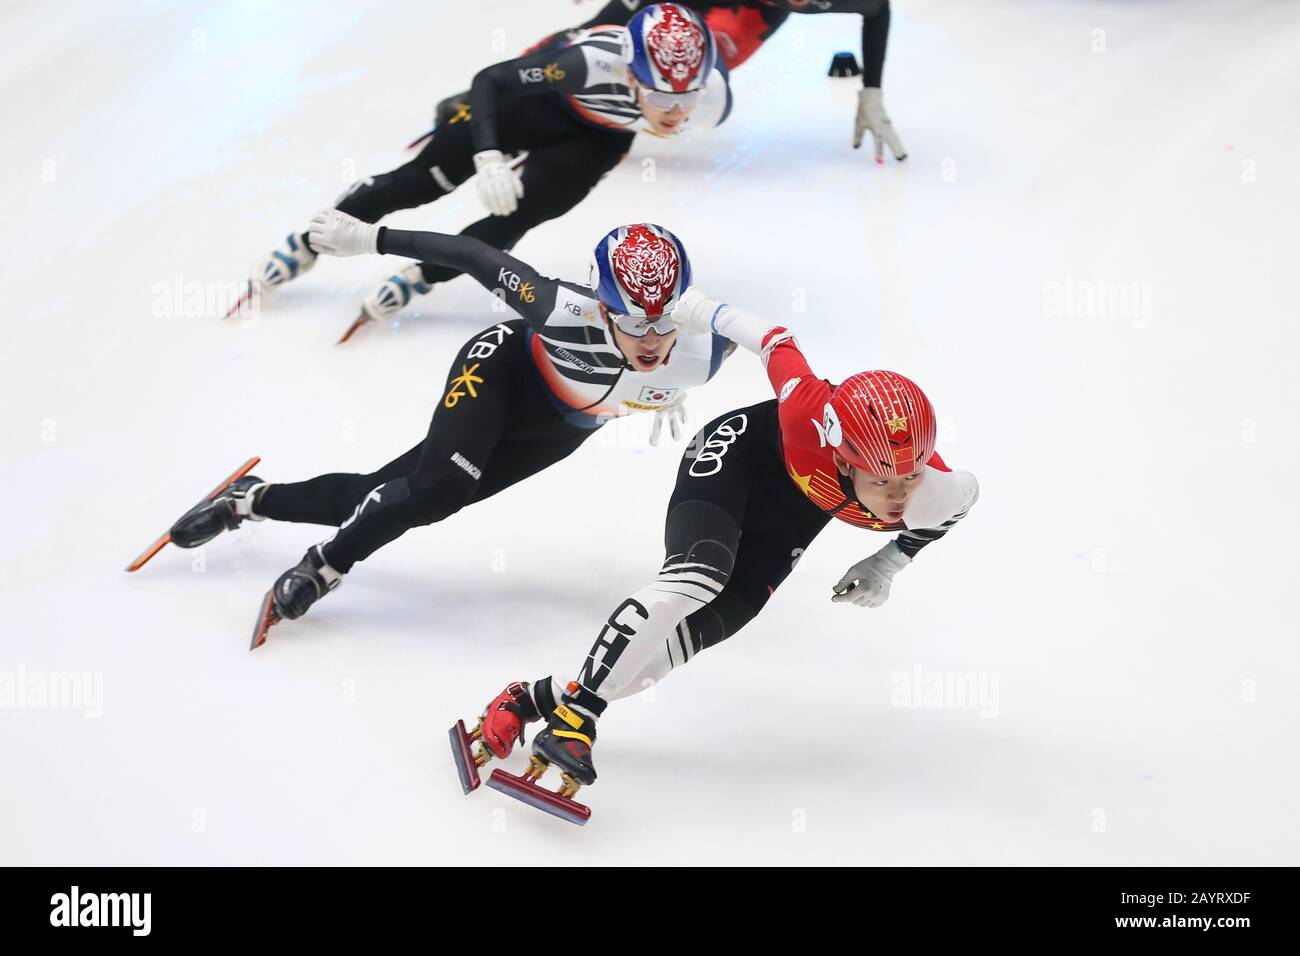 Dordrecht, Netherlands. 16th Feb, 2020. An Kai (R) of China, along with Park Ji Won (C) and Kim Dong Wook of South Korea, competes during the Final A of the Men 1000 meter race (2) at the 2019-2020 ISU World Cup Short Track in Dordrecht, the Netherlands, Feb. 16, 2020. Credit: Zheng Huansong/Xinhua/Alamy Live News Stock Photo